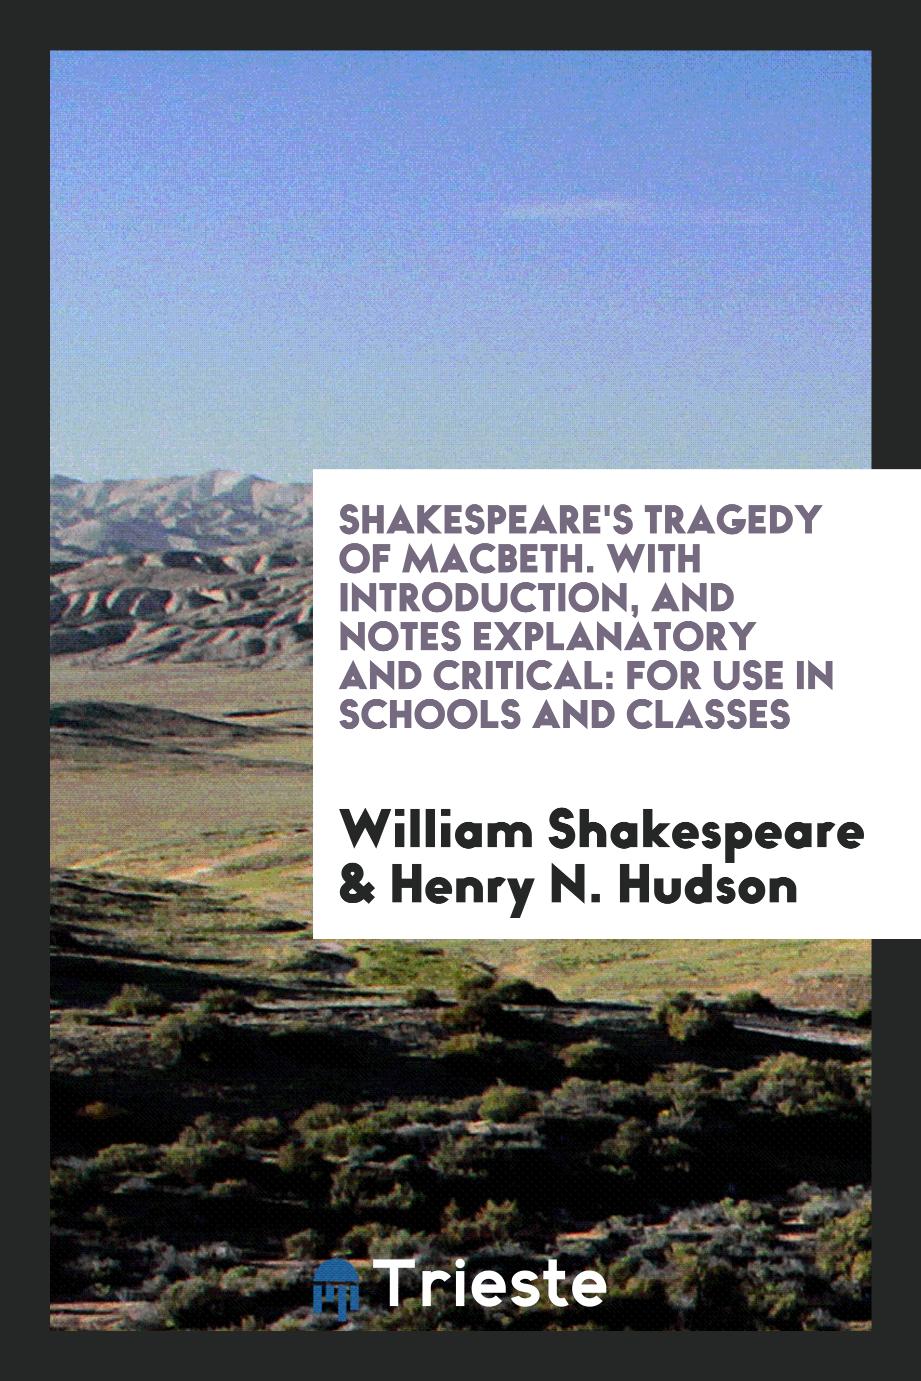 Shakespeare's Tragedy of Macbeth. With Introduction, and Notes Explanatory and Critical: For Use in Schools and Classes